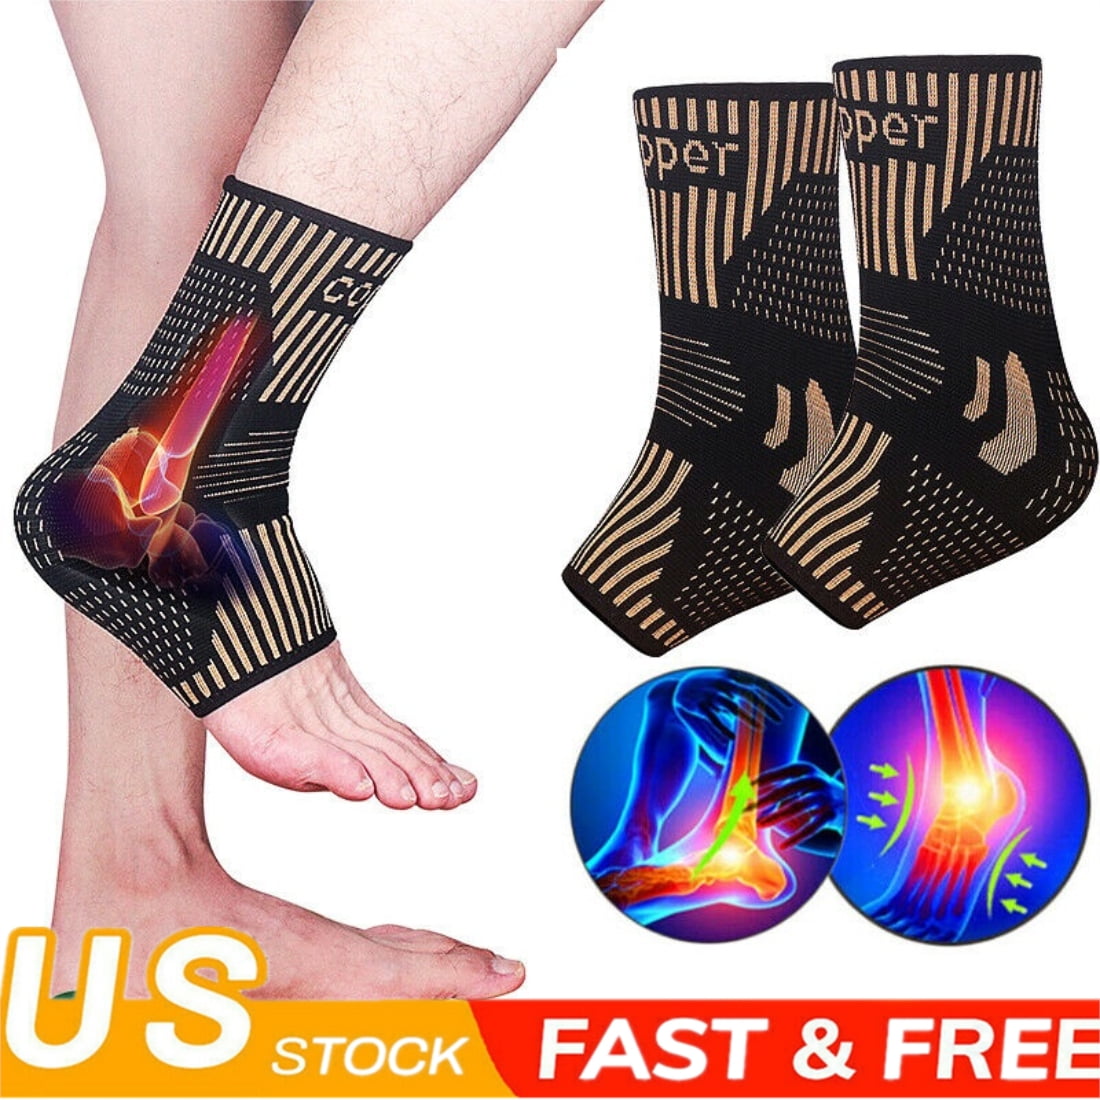 Copper Ankle Support Brace Compression Sleeve Foot Pain Relief Jogging Sprain HG 